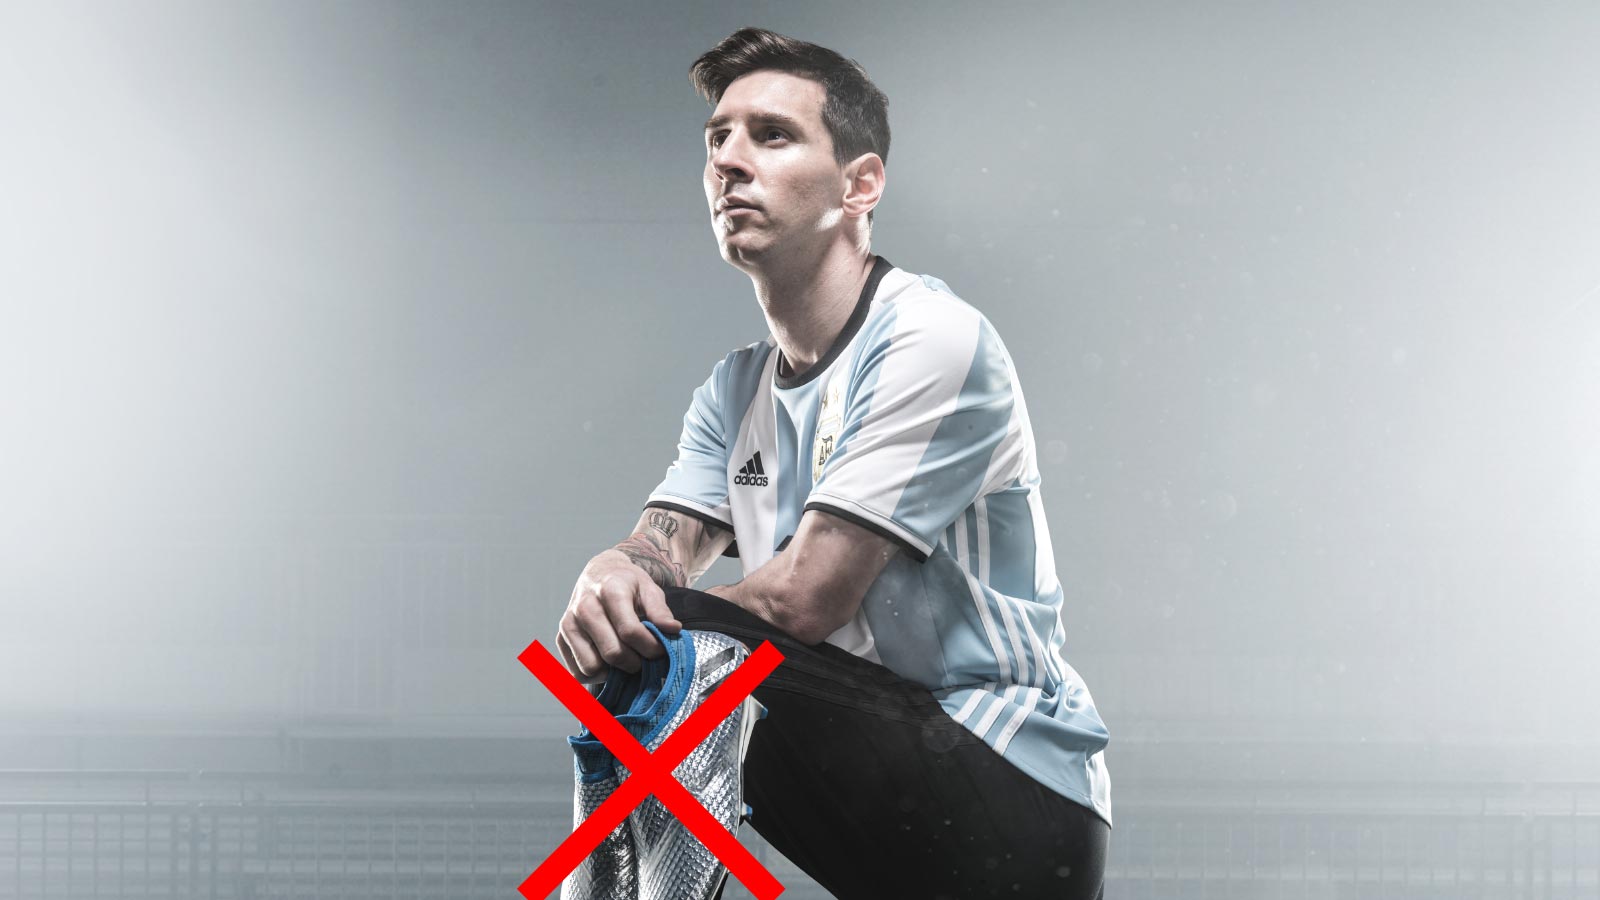 The Stand Alone Adidas Messi Silo Will Be Scrapped Footy